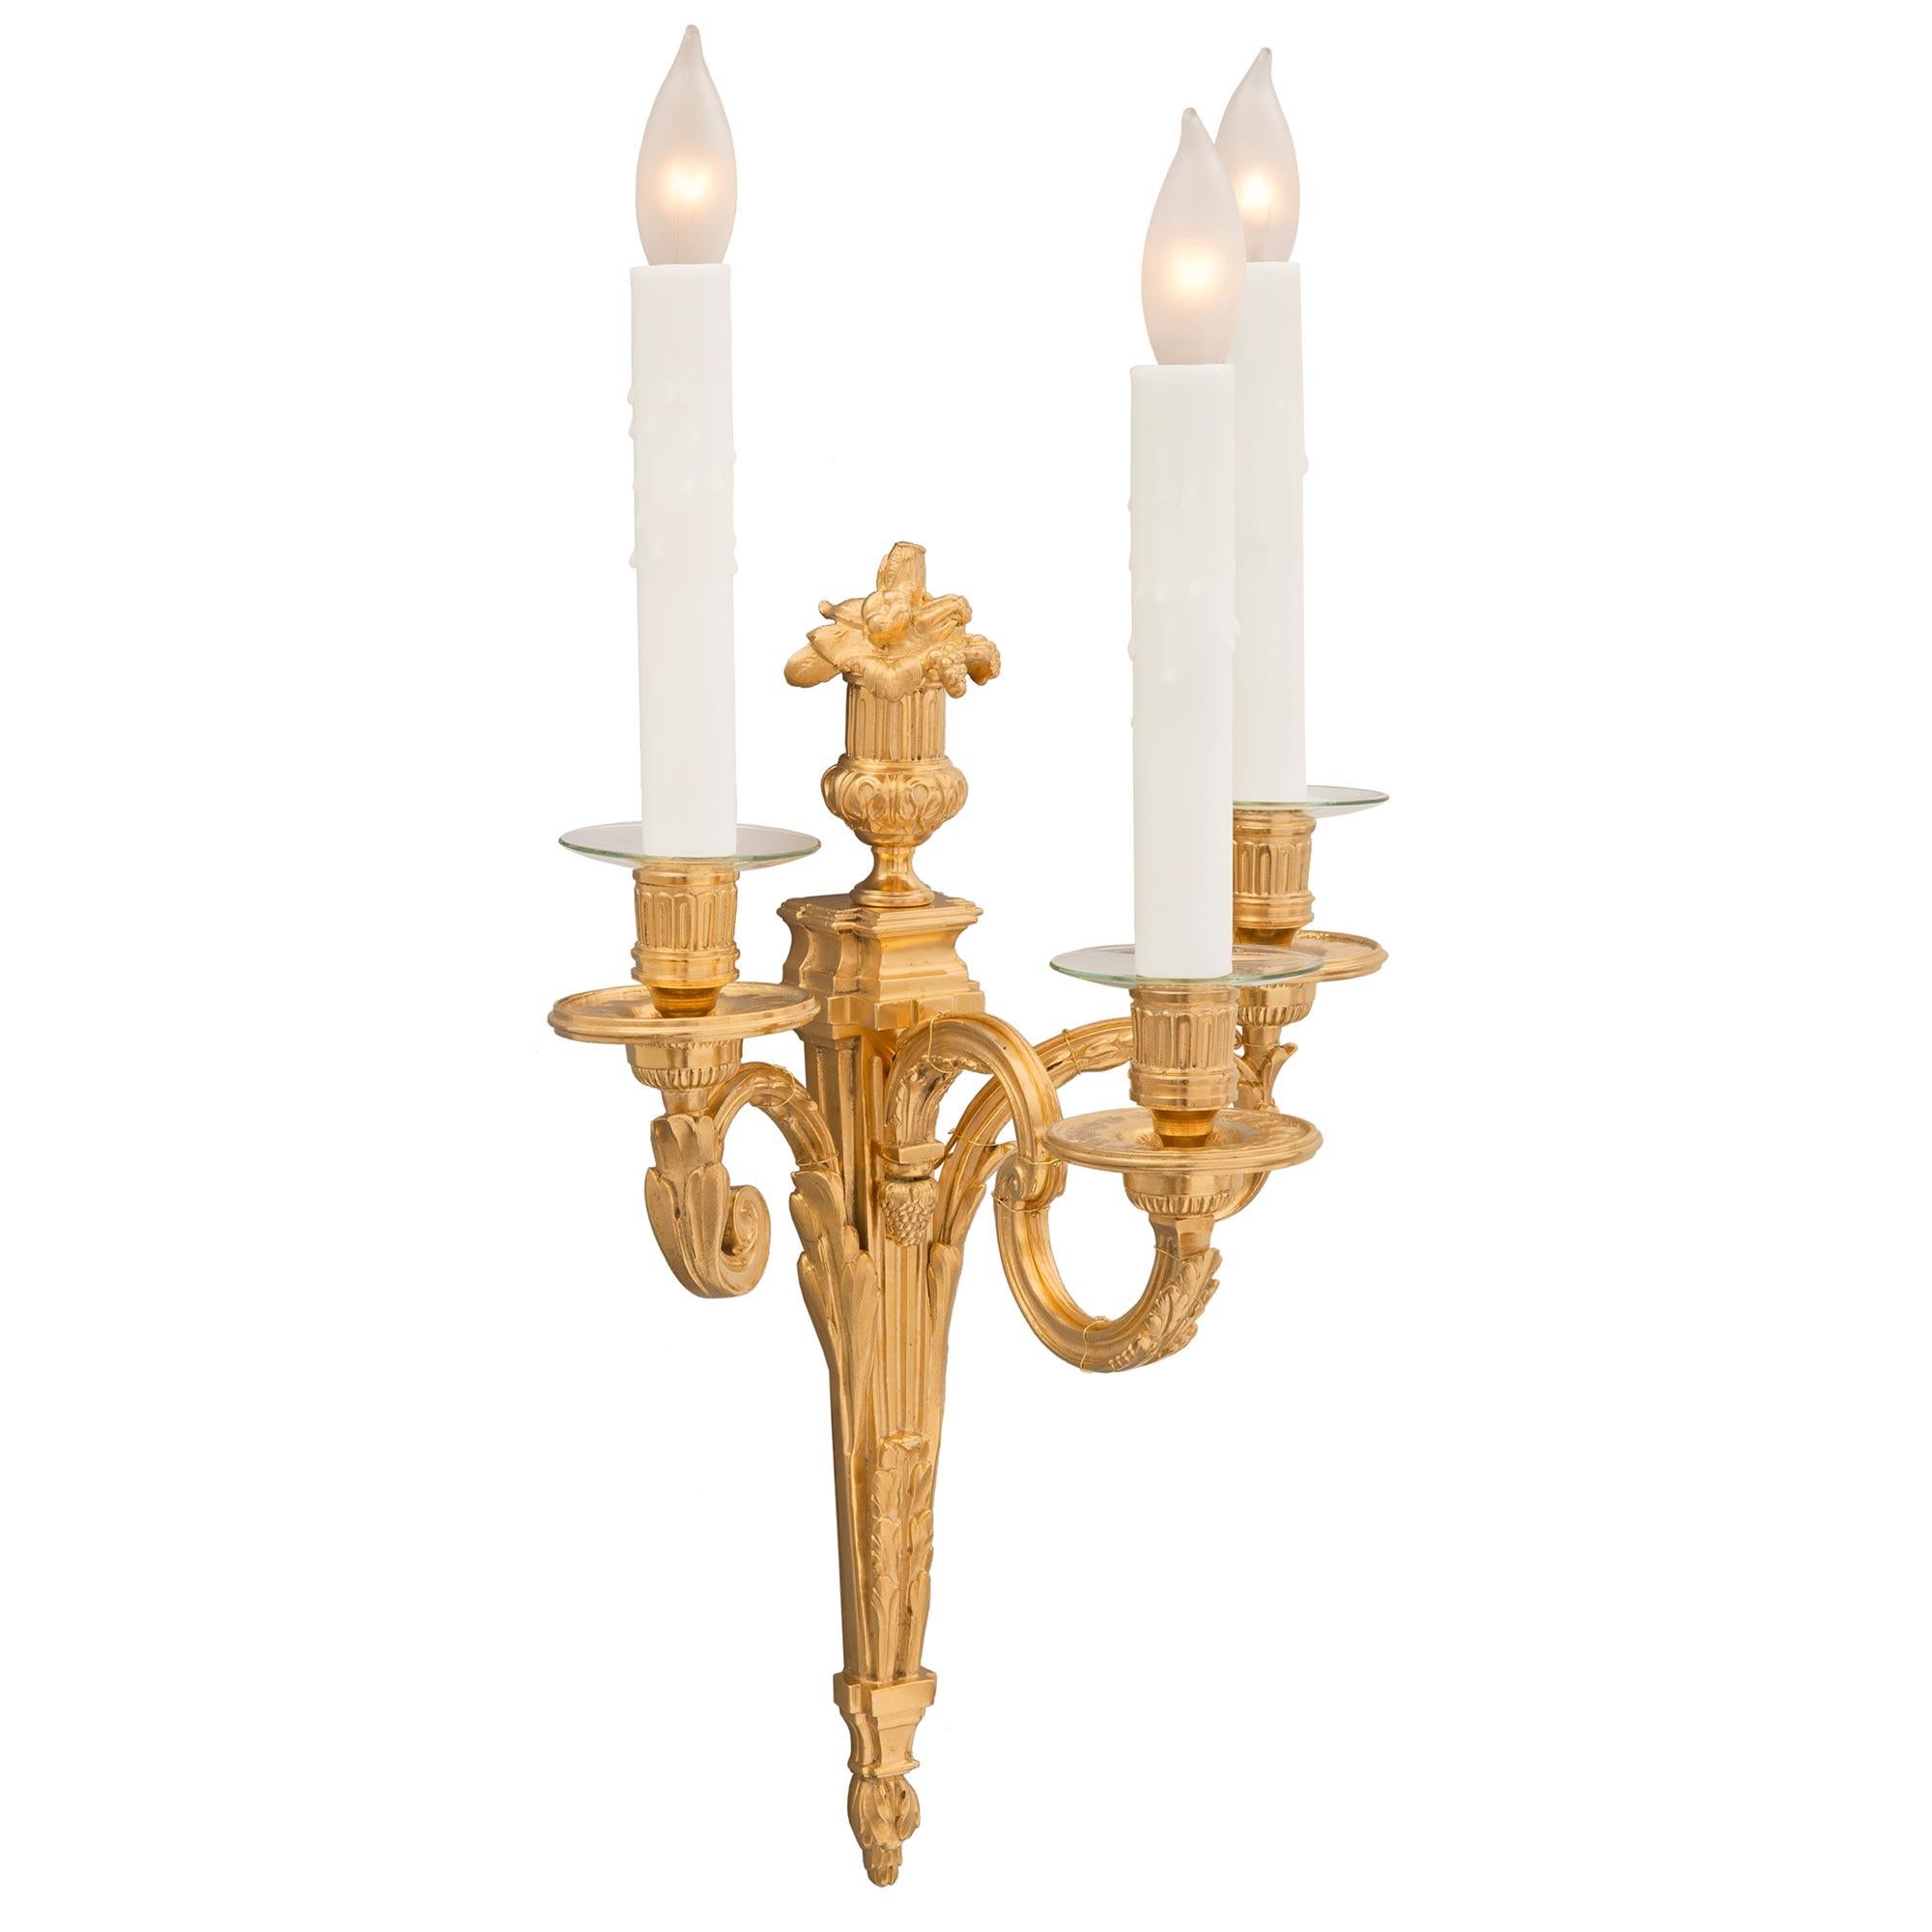 An extremely elegant and high quality pair of French 19th century Louis XVI st. ormolu sconces. Each three arm sconce is centered by a richly chased bottom floral finial in a striking satin and burnished finish below the tapered central fut